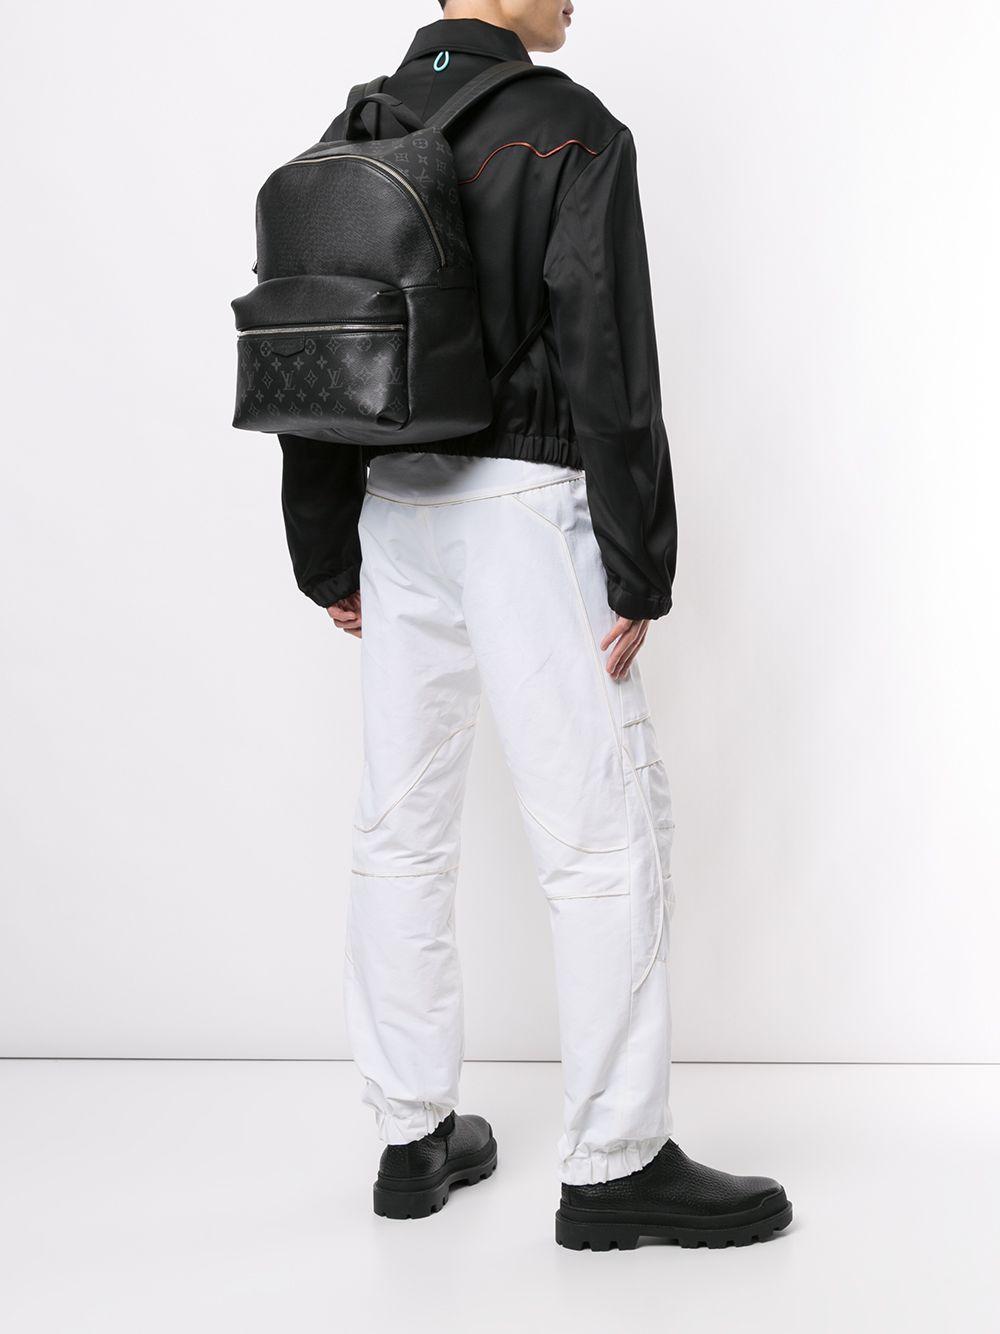 Louis Vuitton 2019 Discovery Backpack in Black for Men